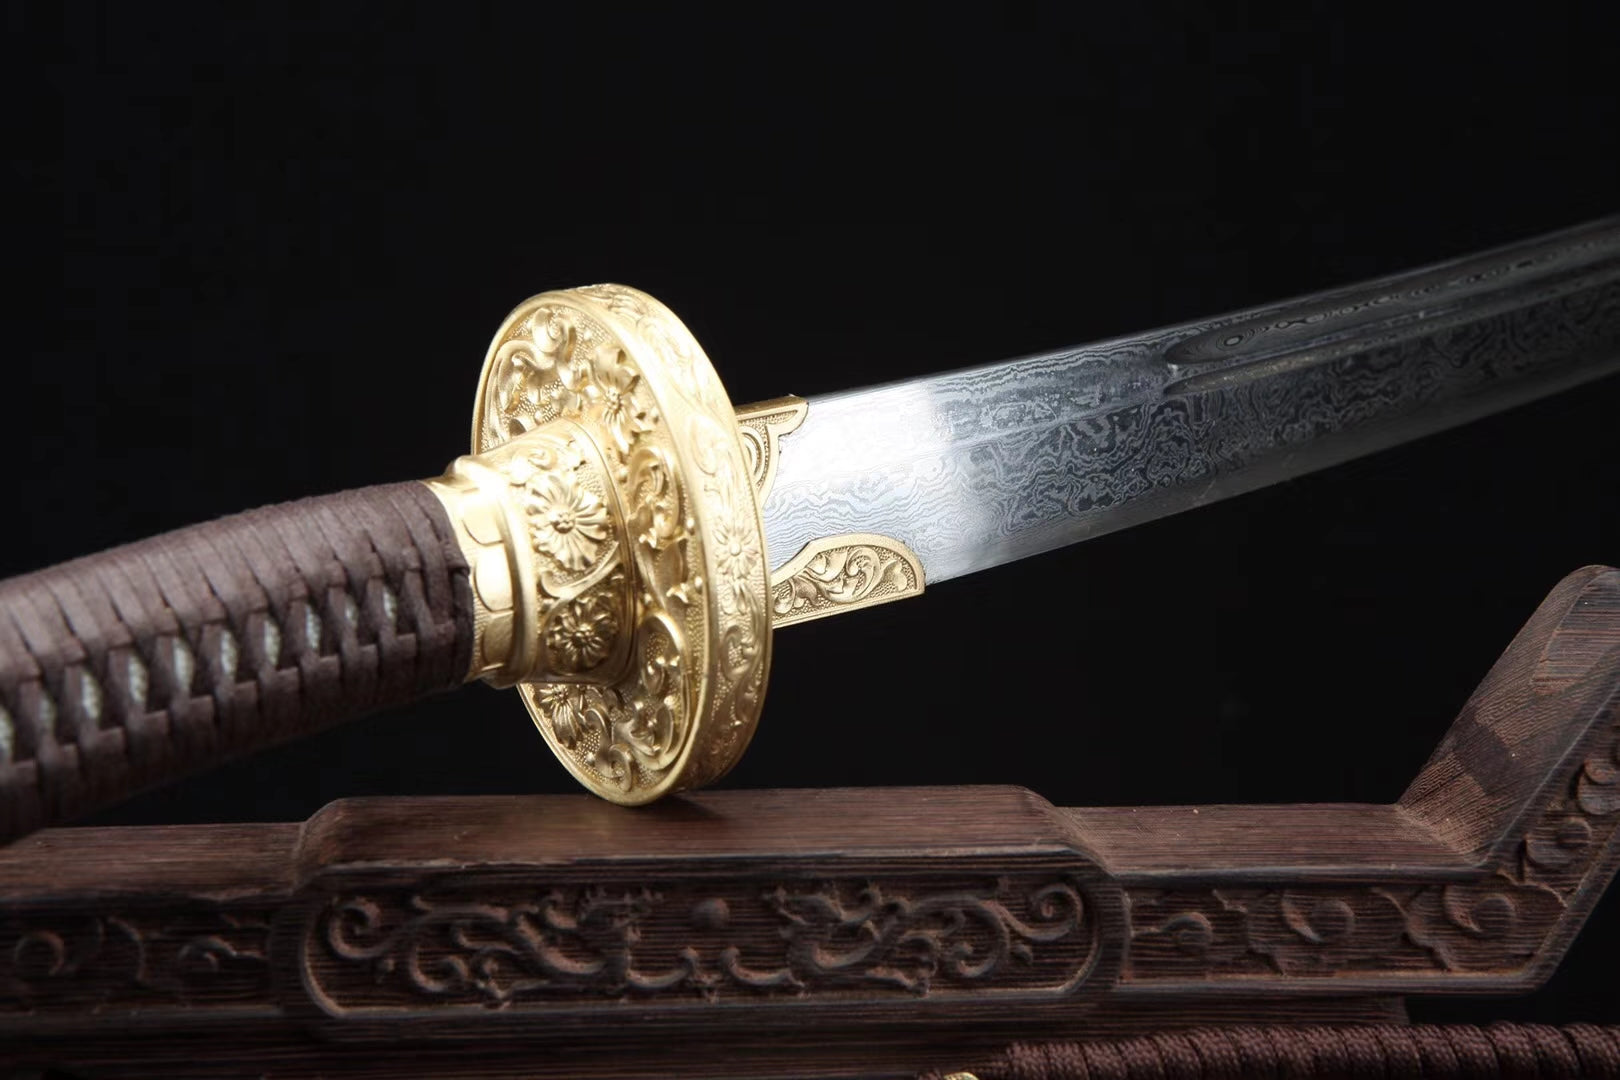 Qing dao sword,Damascus steel blade,MAHOGANY scabbard,Brass - Chinese sword shop